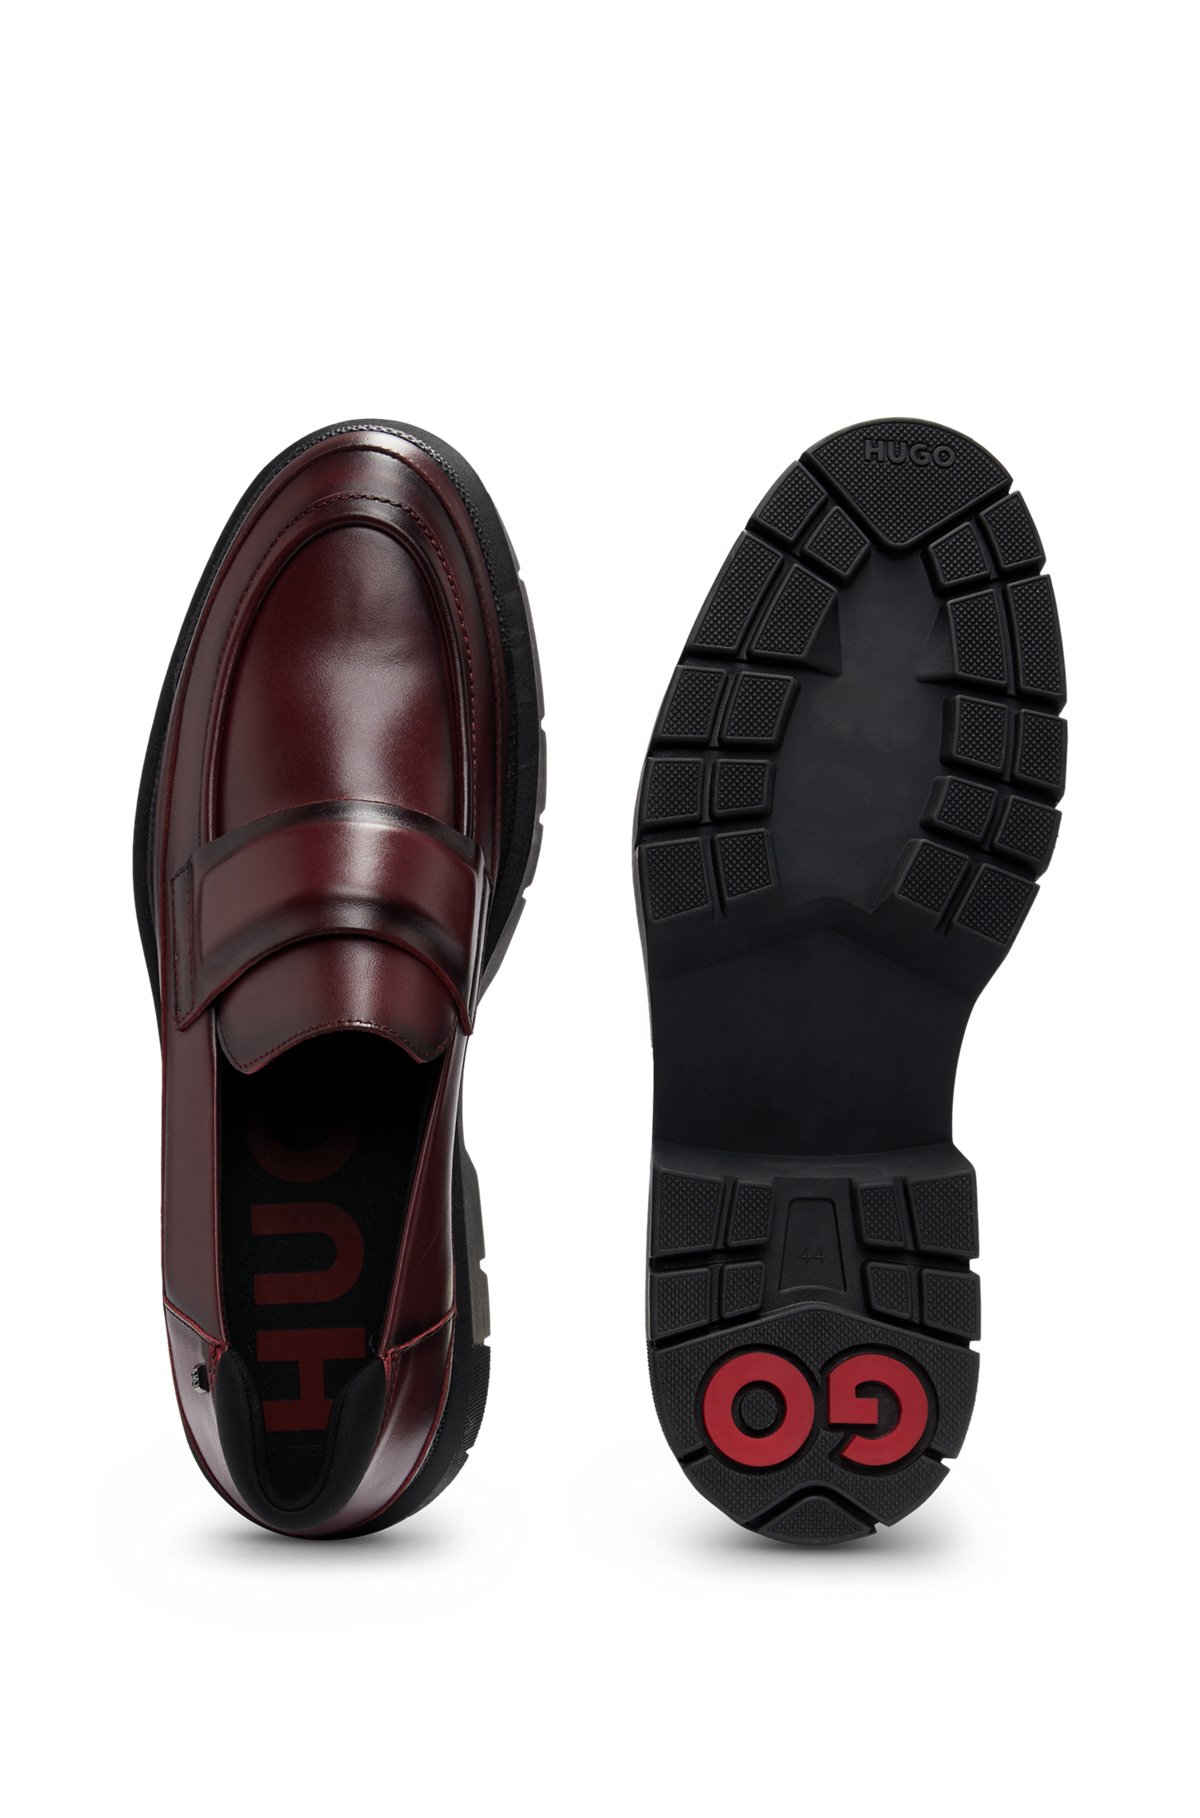 Nappa-leather moccasins with padded penny trim, Dark Red